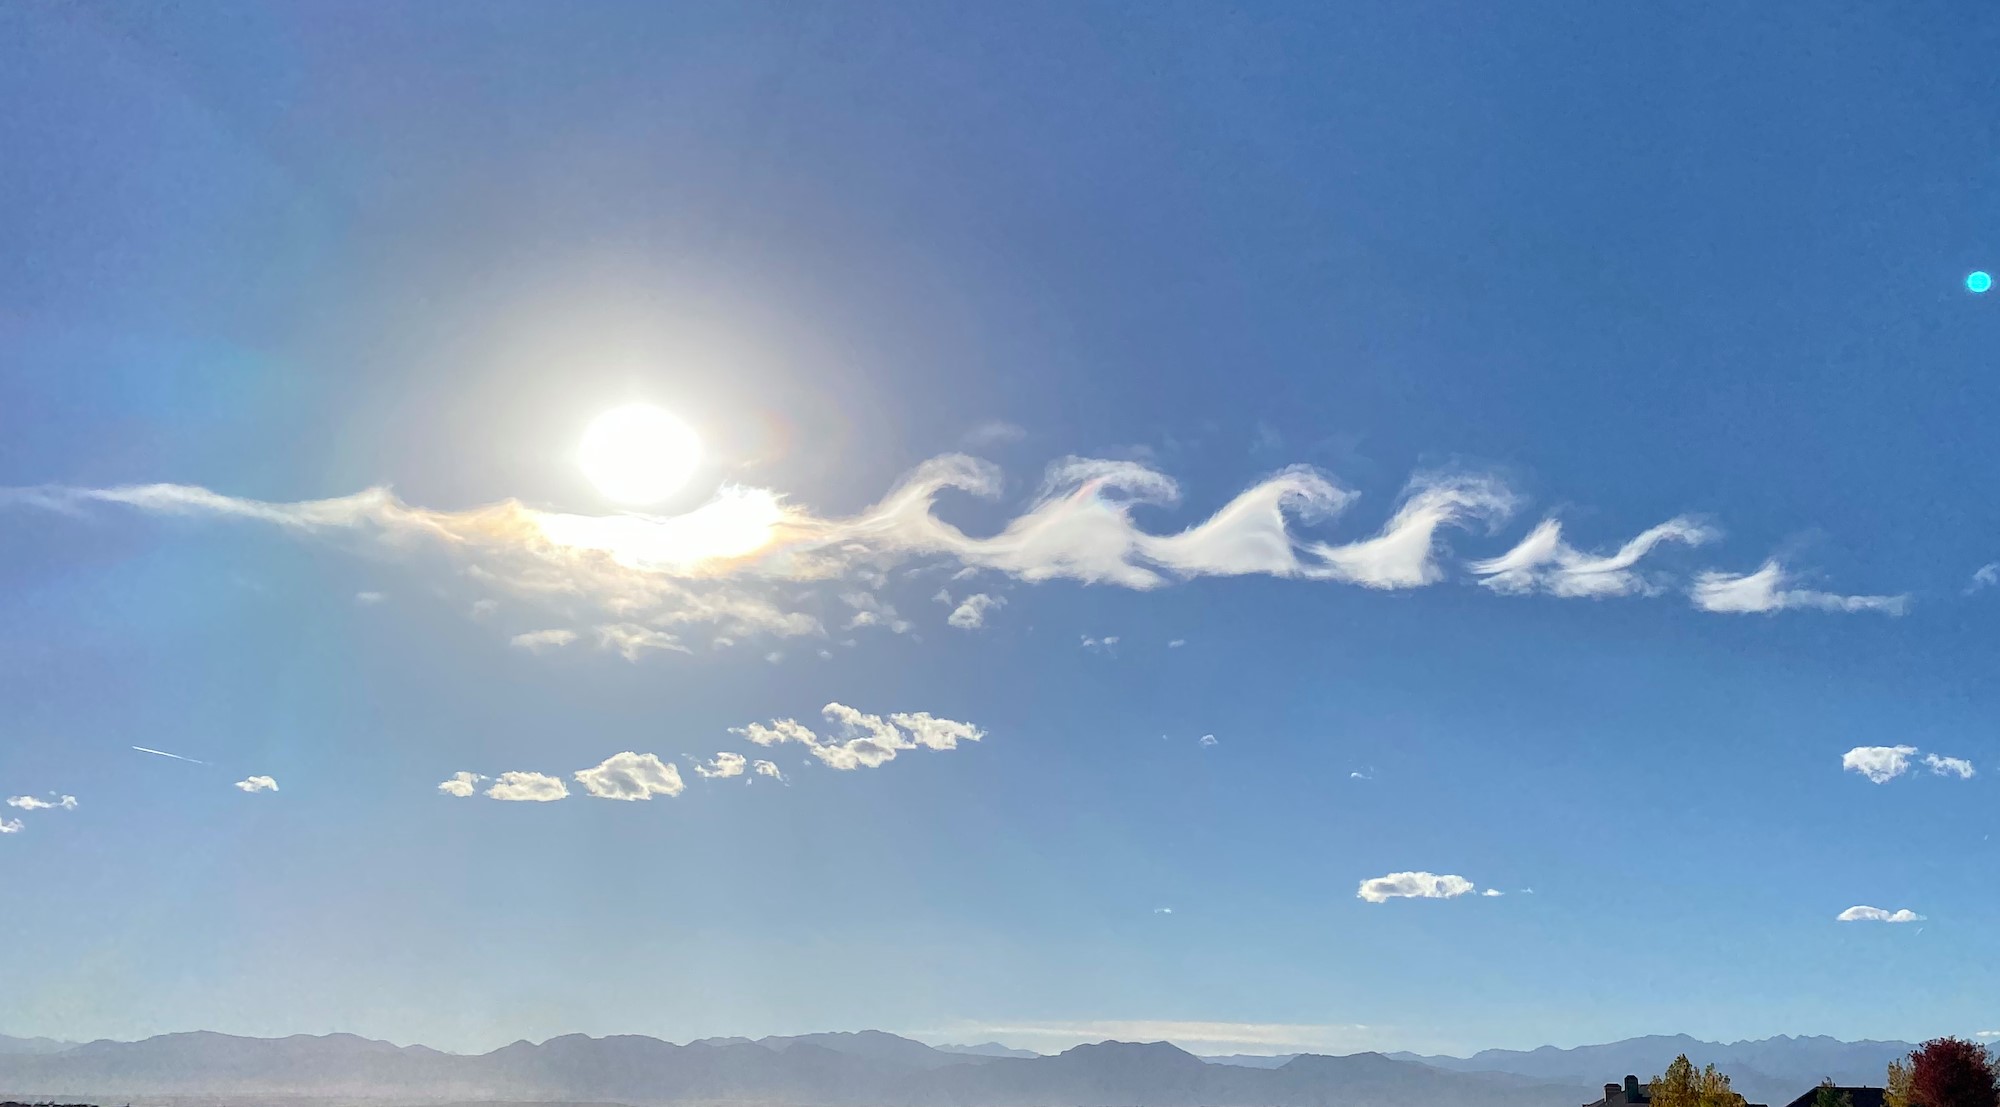 Kelvin-Helmholtz wave clouds are a type of gravity wave that occurs when there is a strong vertical shear between two air streams, causing winds to blow faster at the upper level than at the lower levels. 